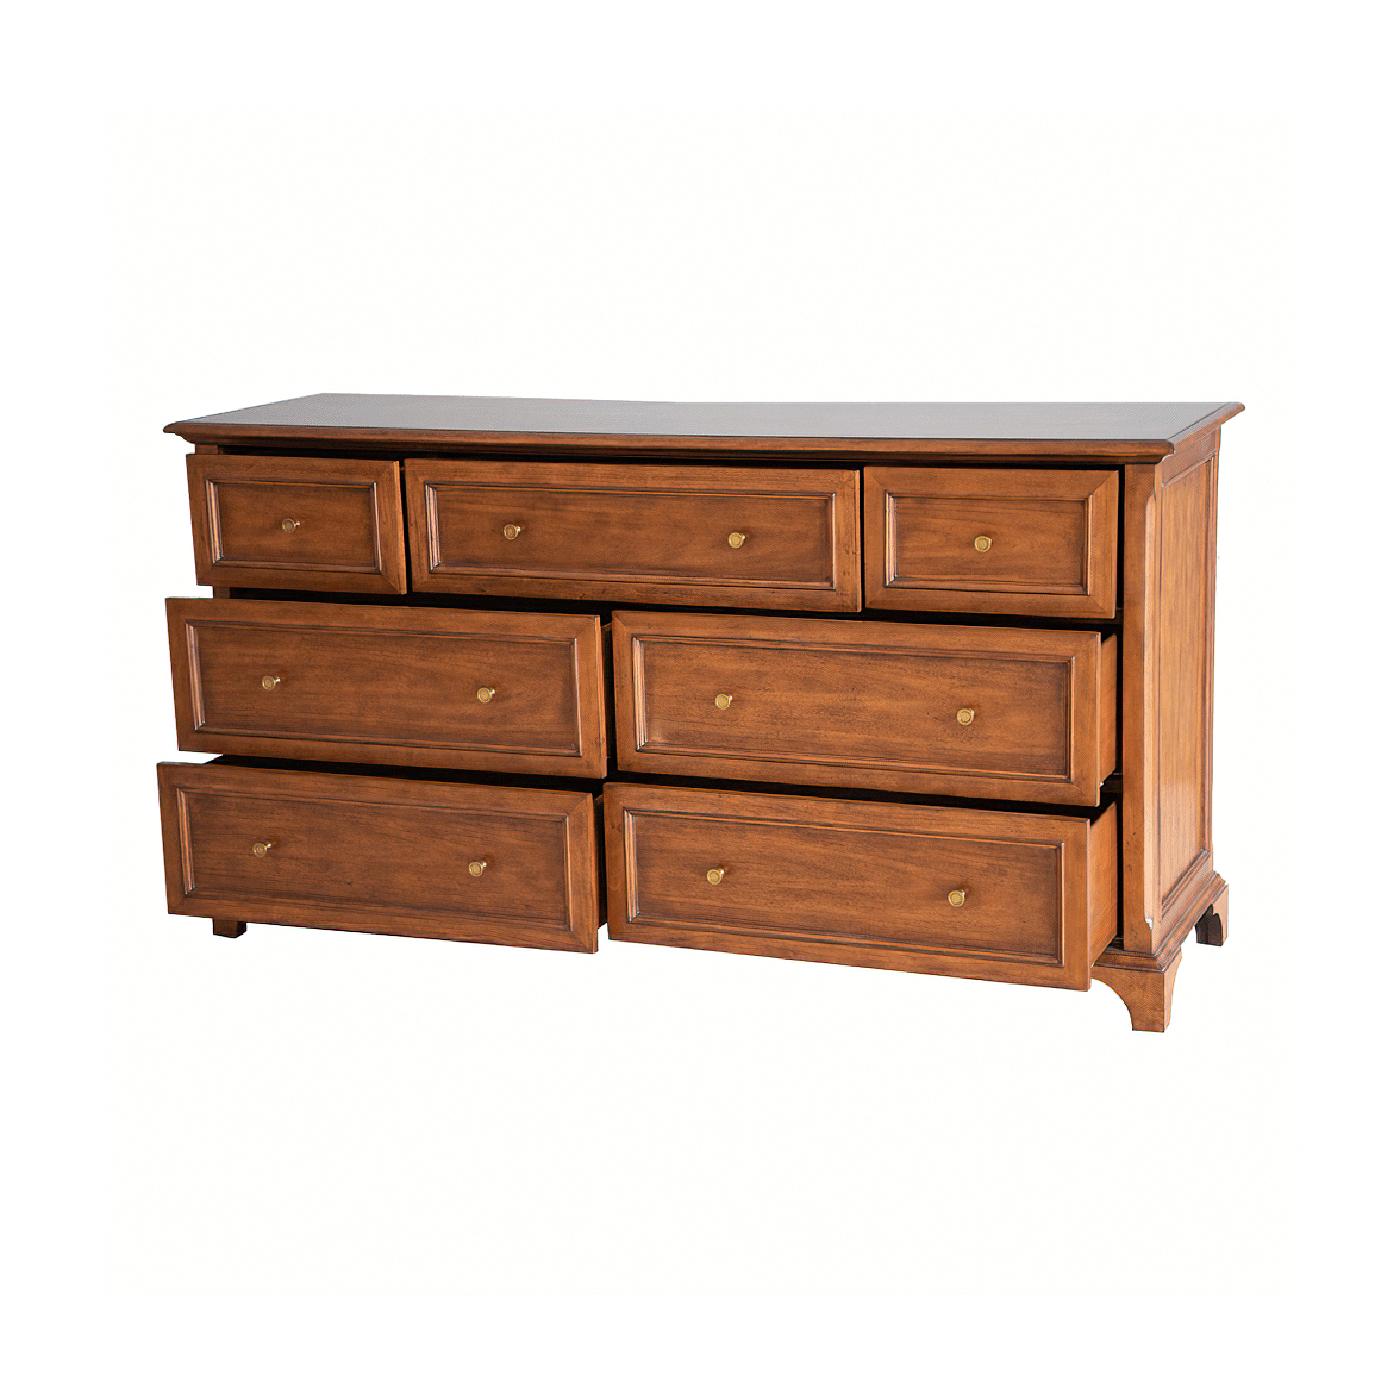 Traditional long dresser with an Ogee edge top, beveled decorative trim corners, hand-cast brass knobs, raised on bracket feet with a hand-rubbed warm rustic wood tone lightly distressed finish.

Dimensions: 68